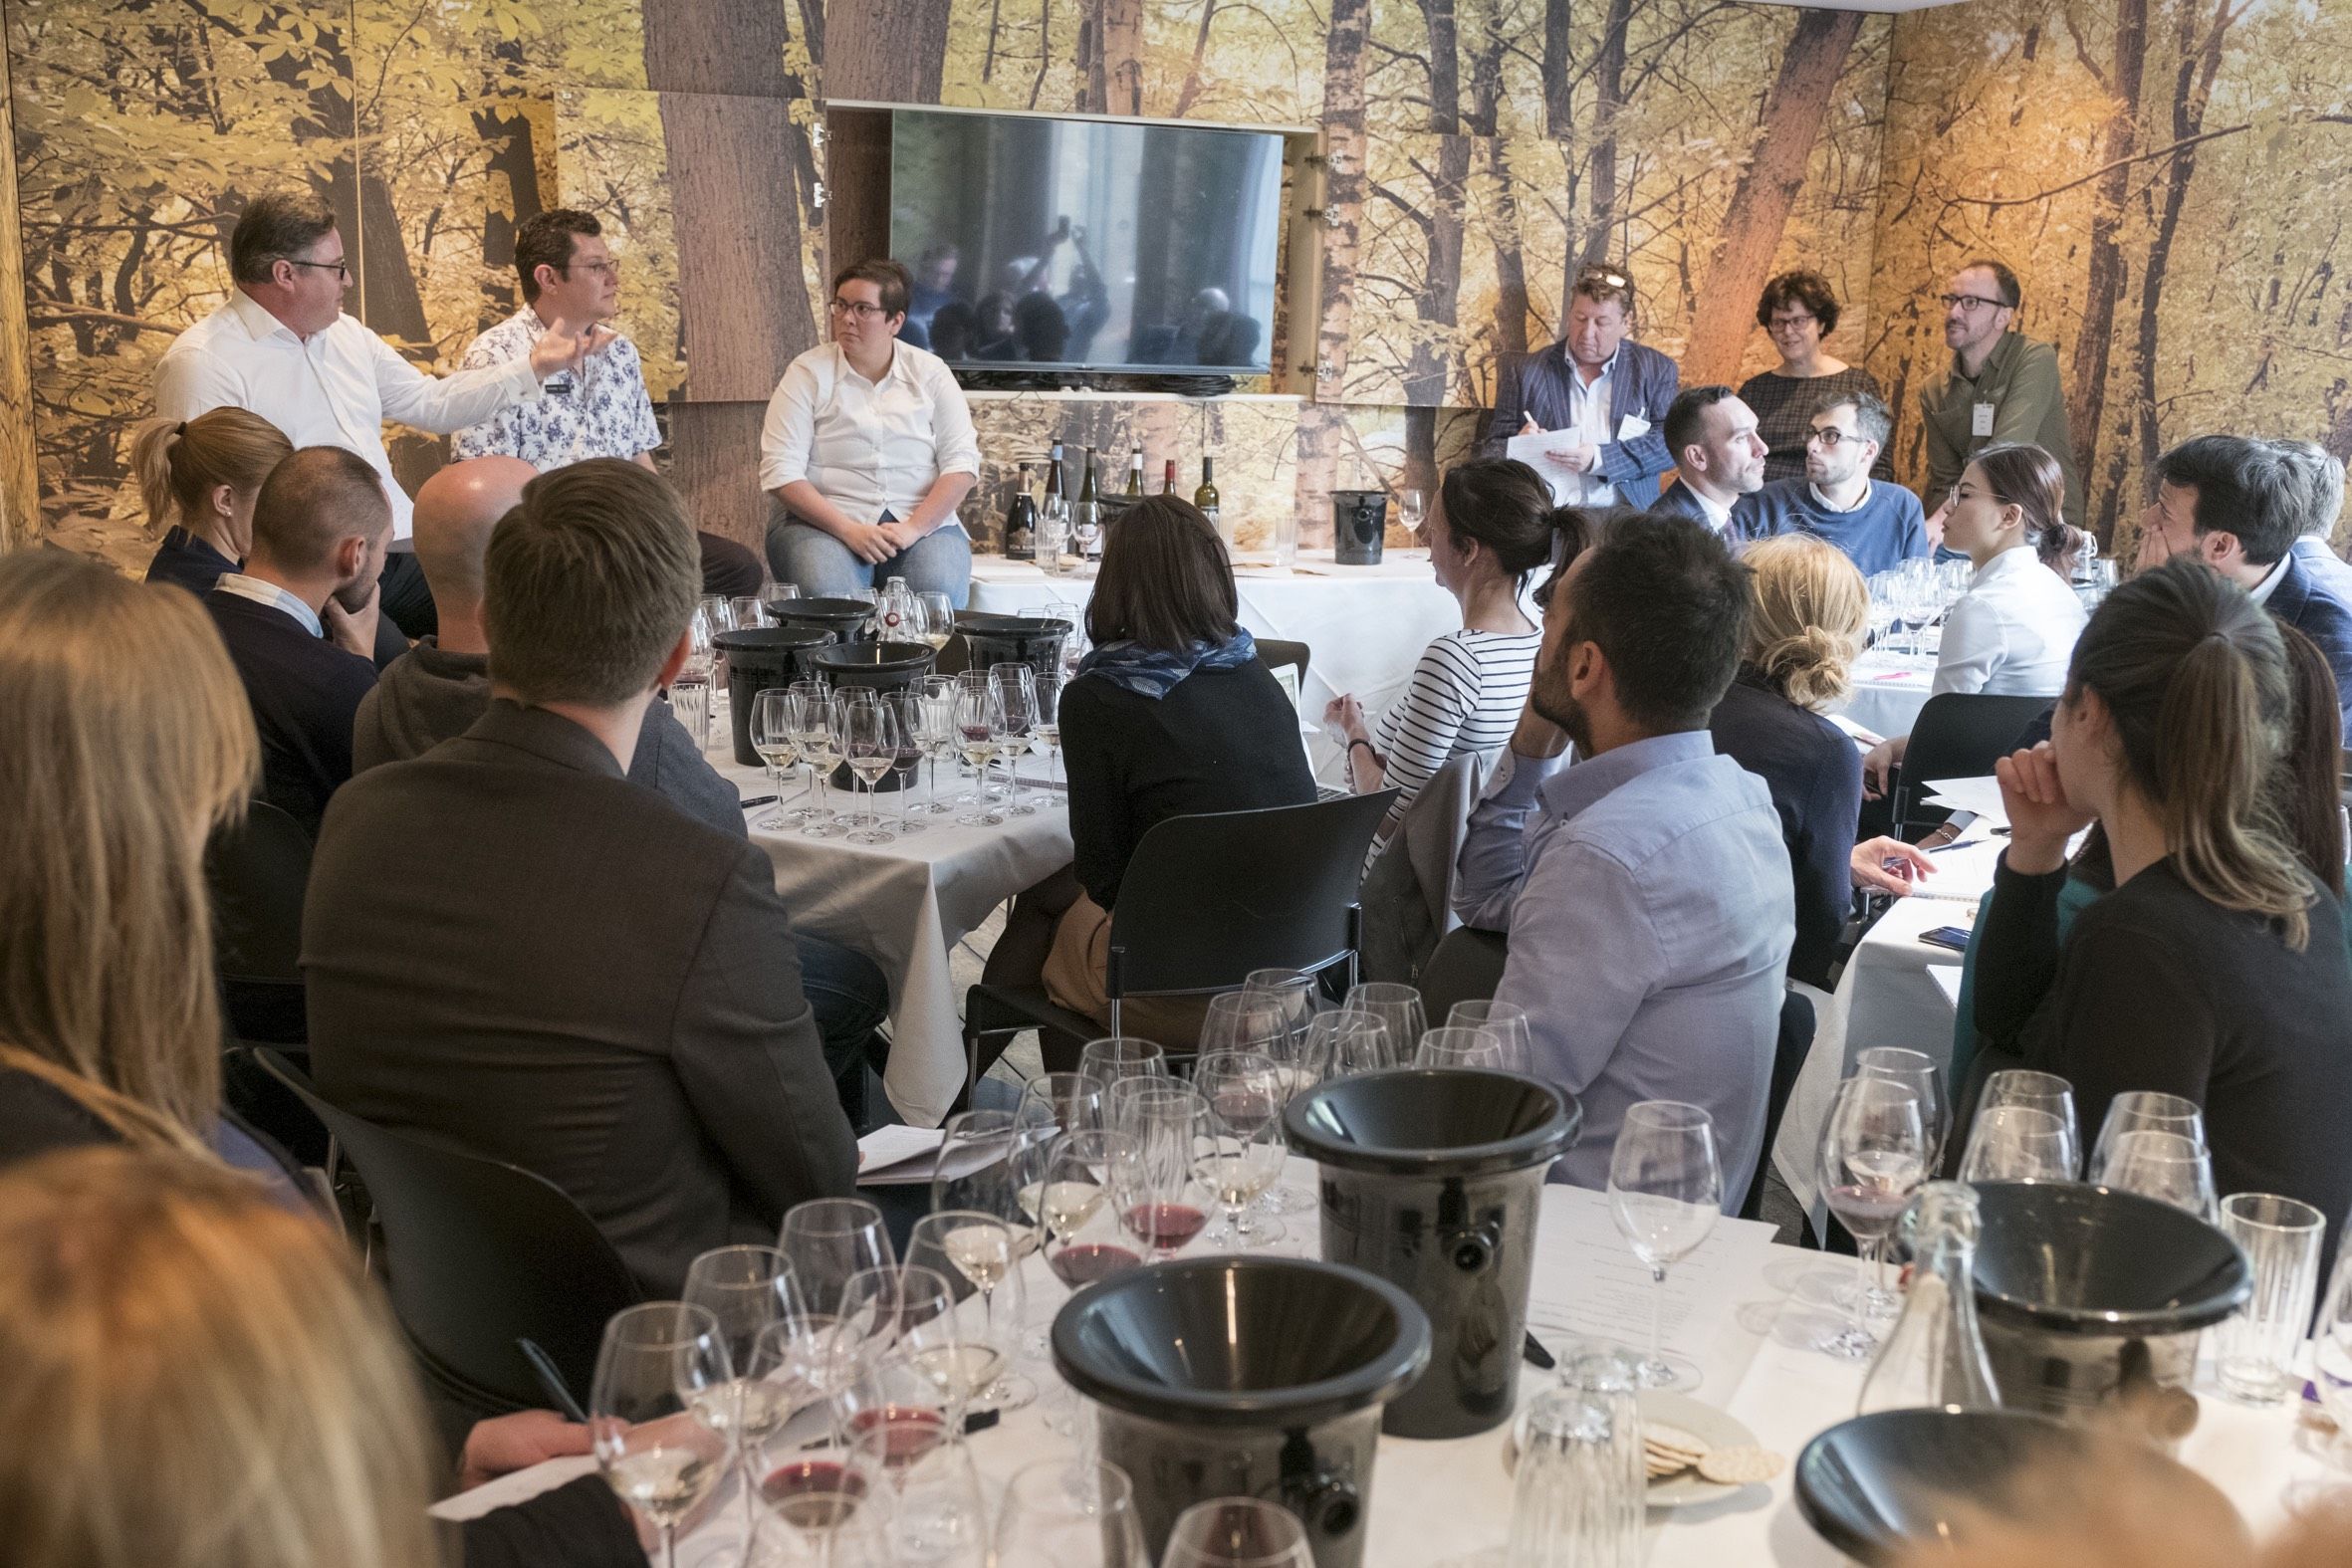 Germany debate: what wines and styles are working best?